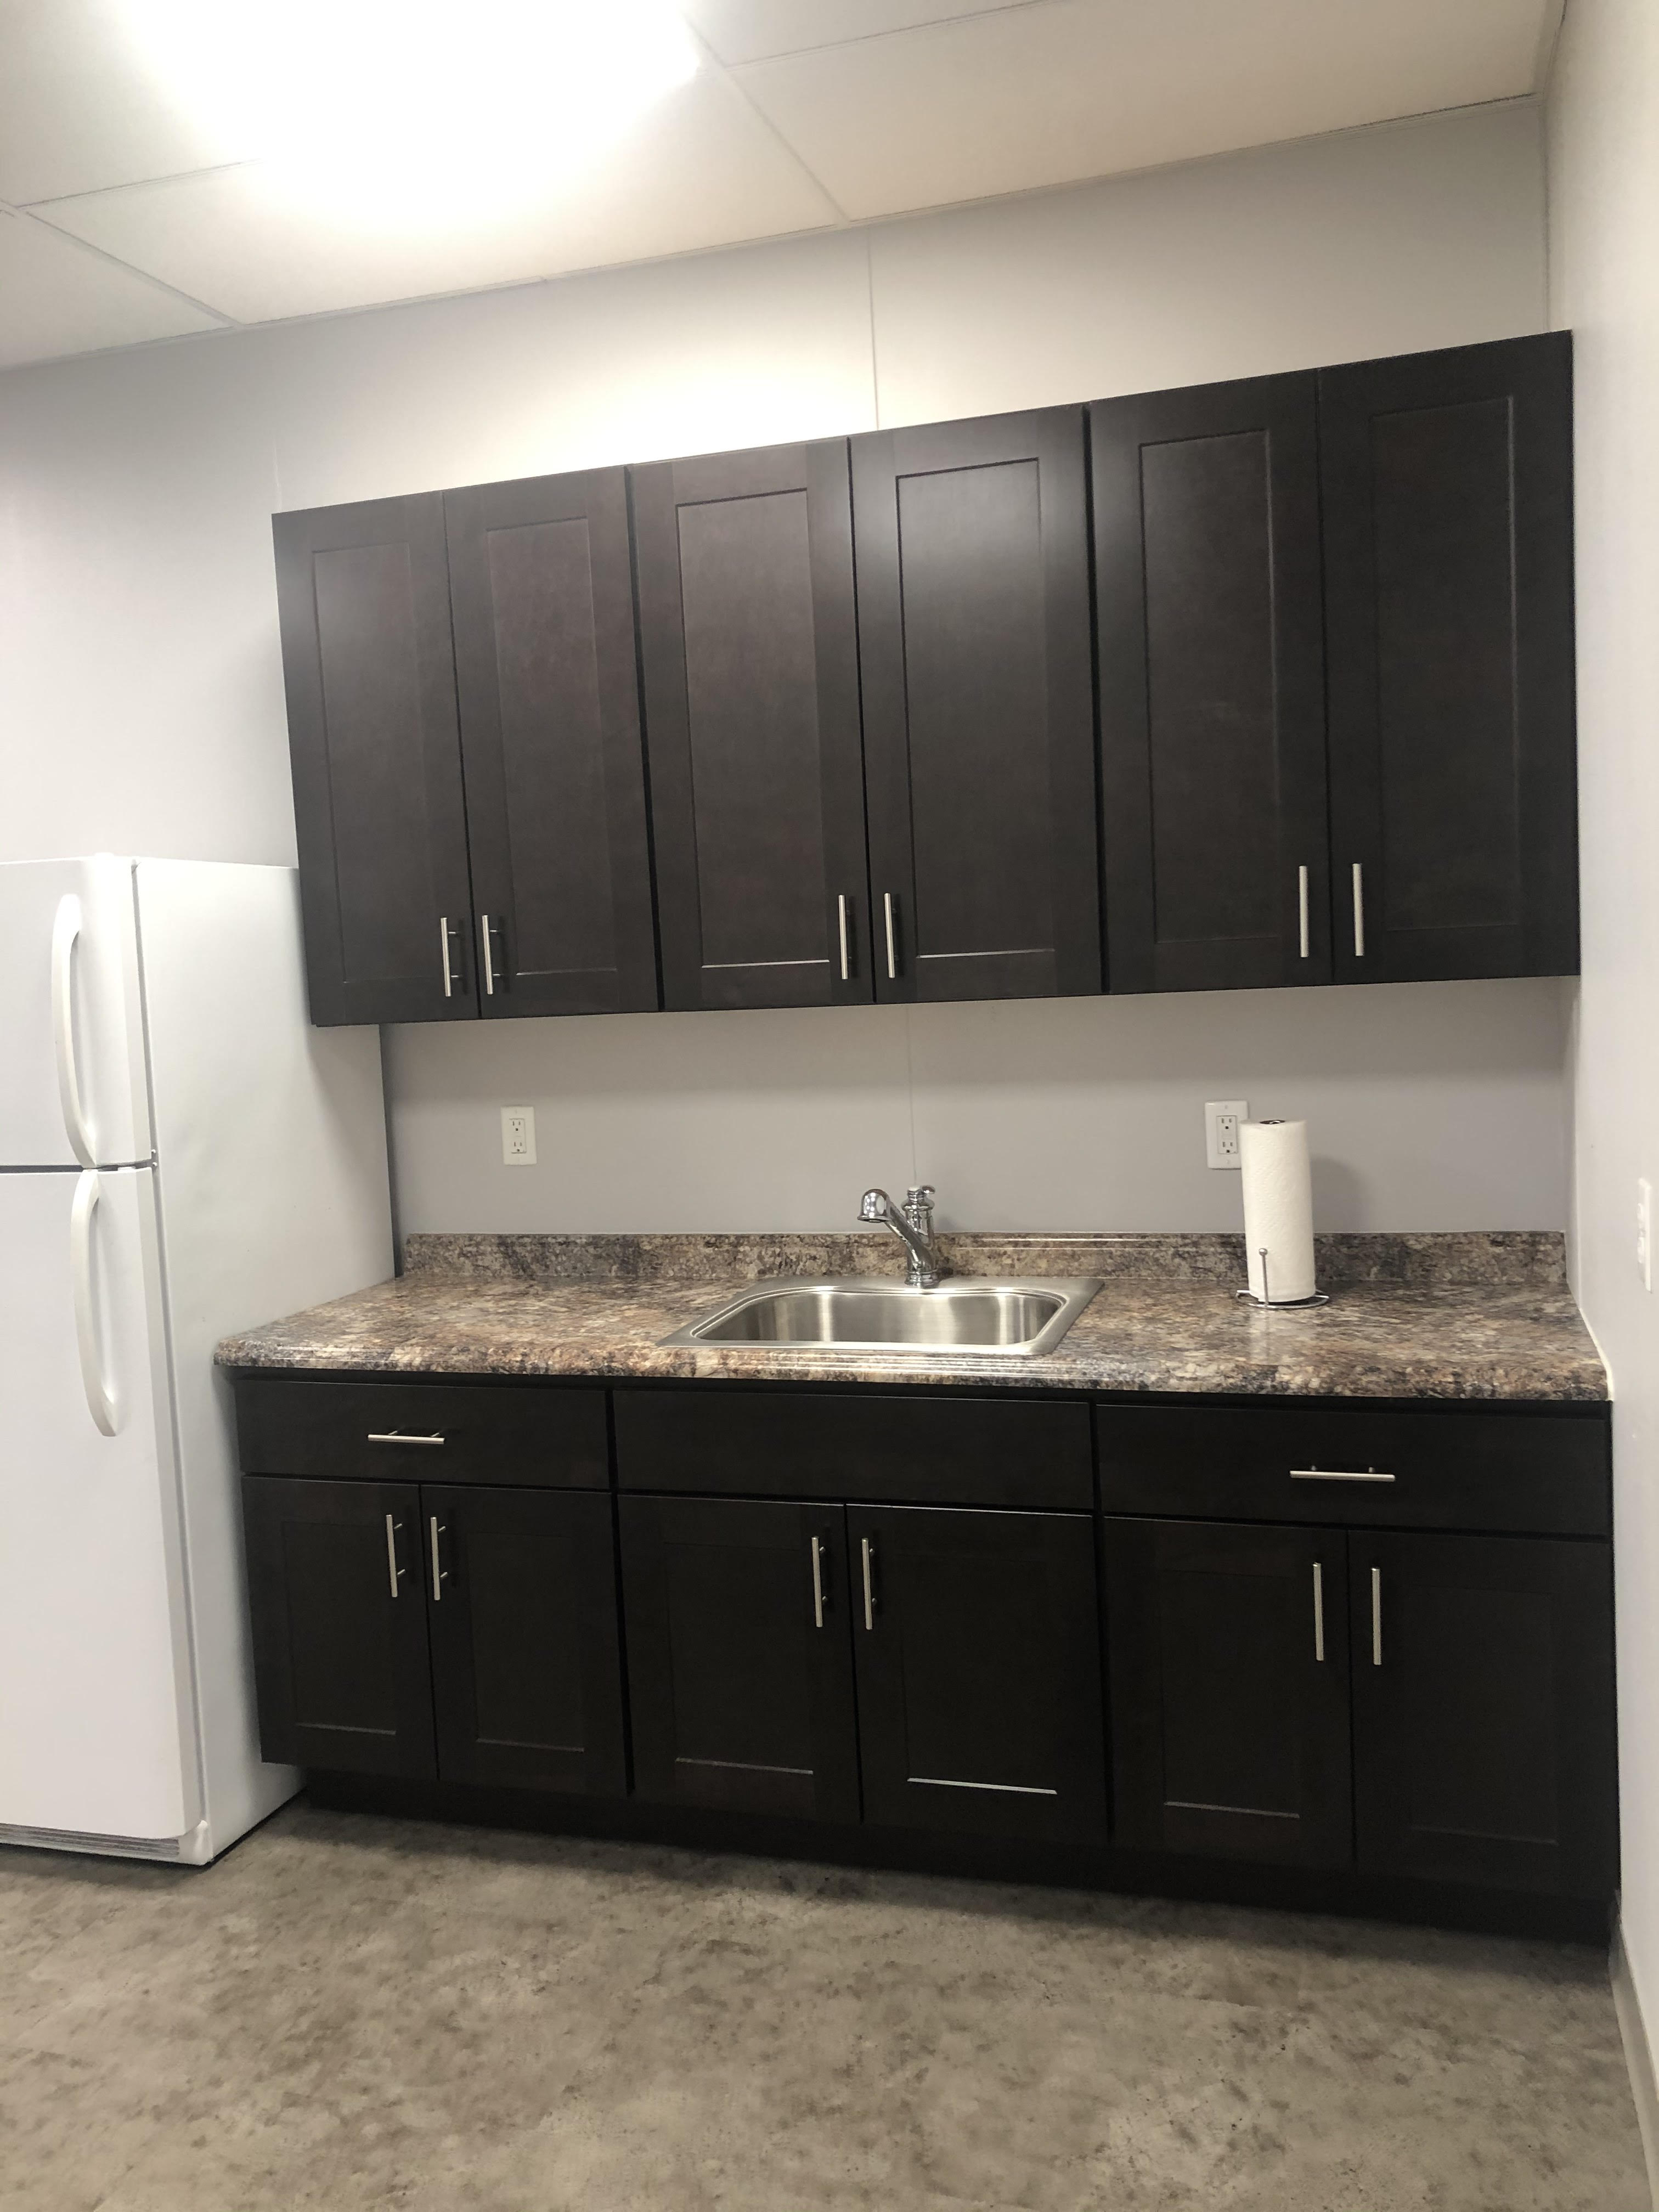 DRIVE Professional Building Lunch Room Kitchenette